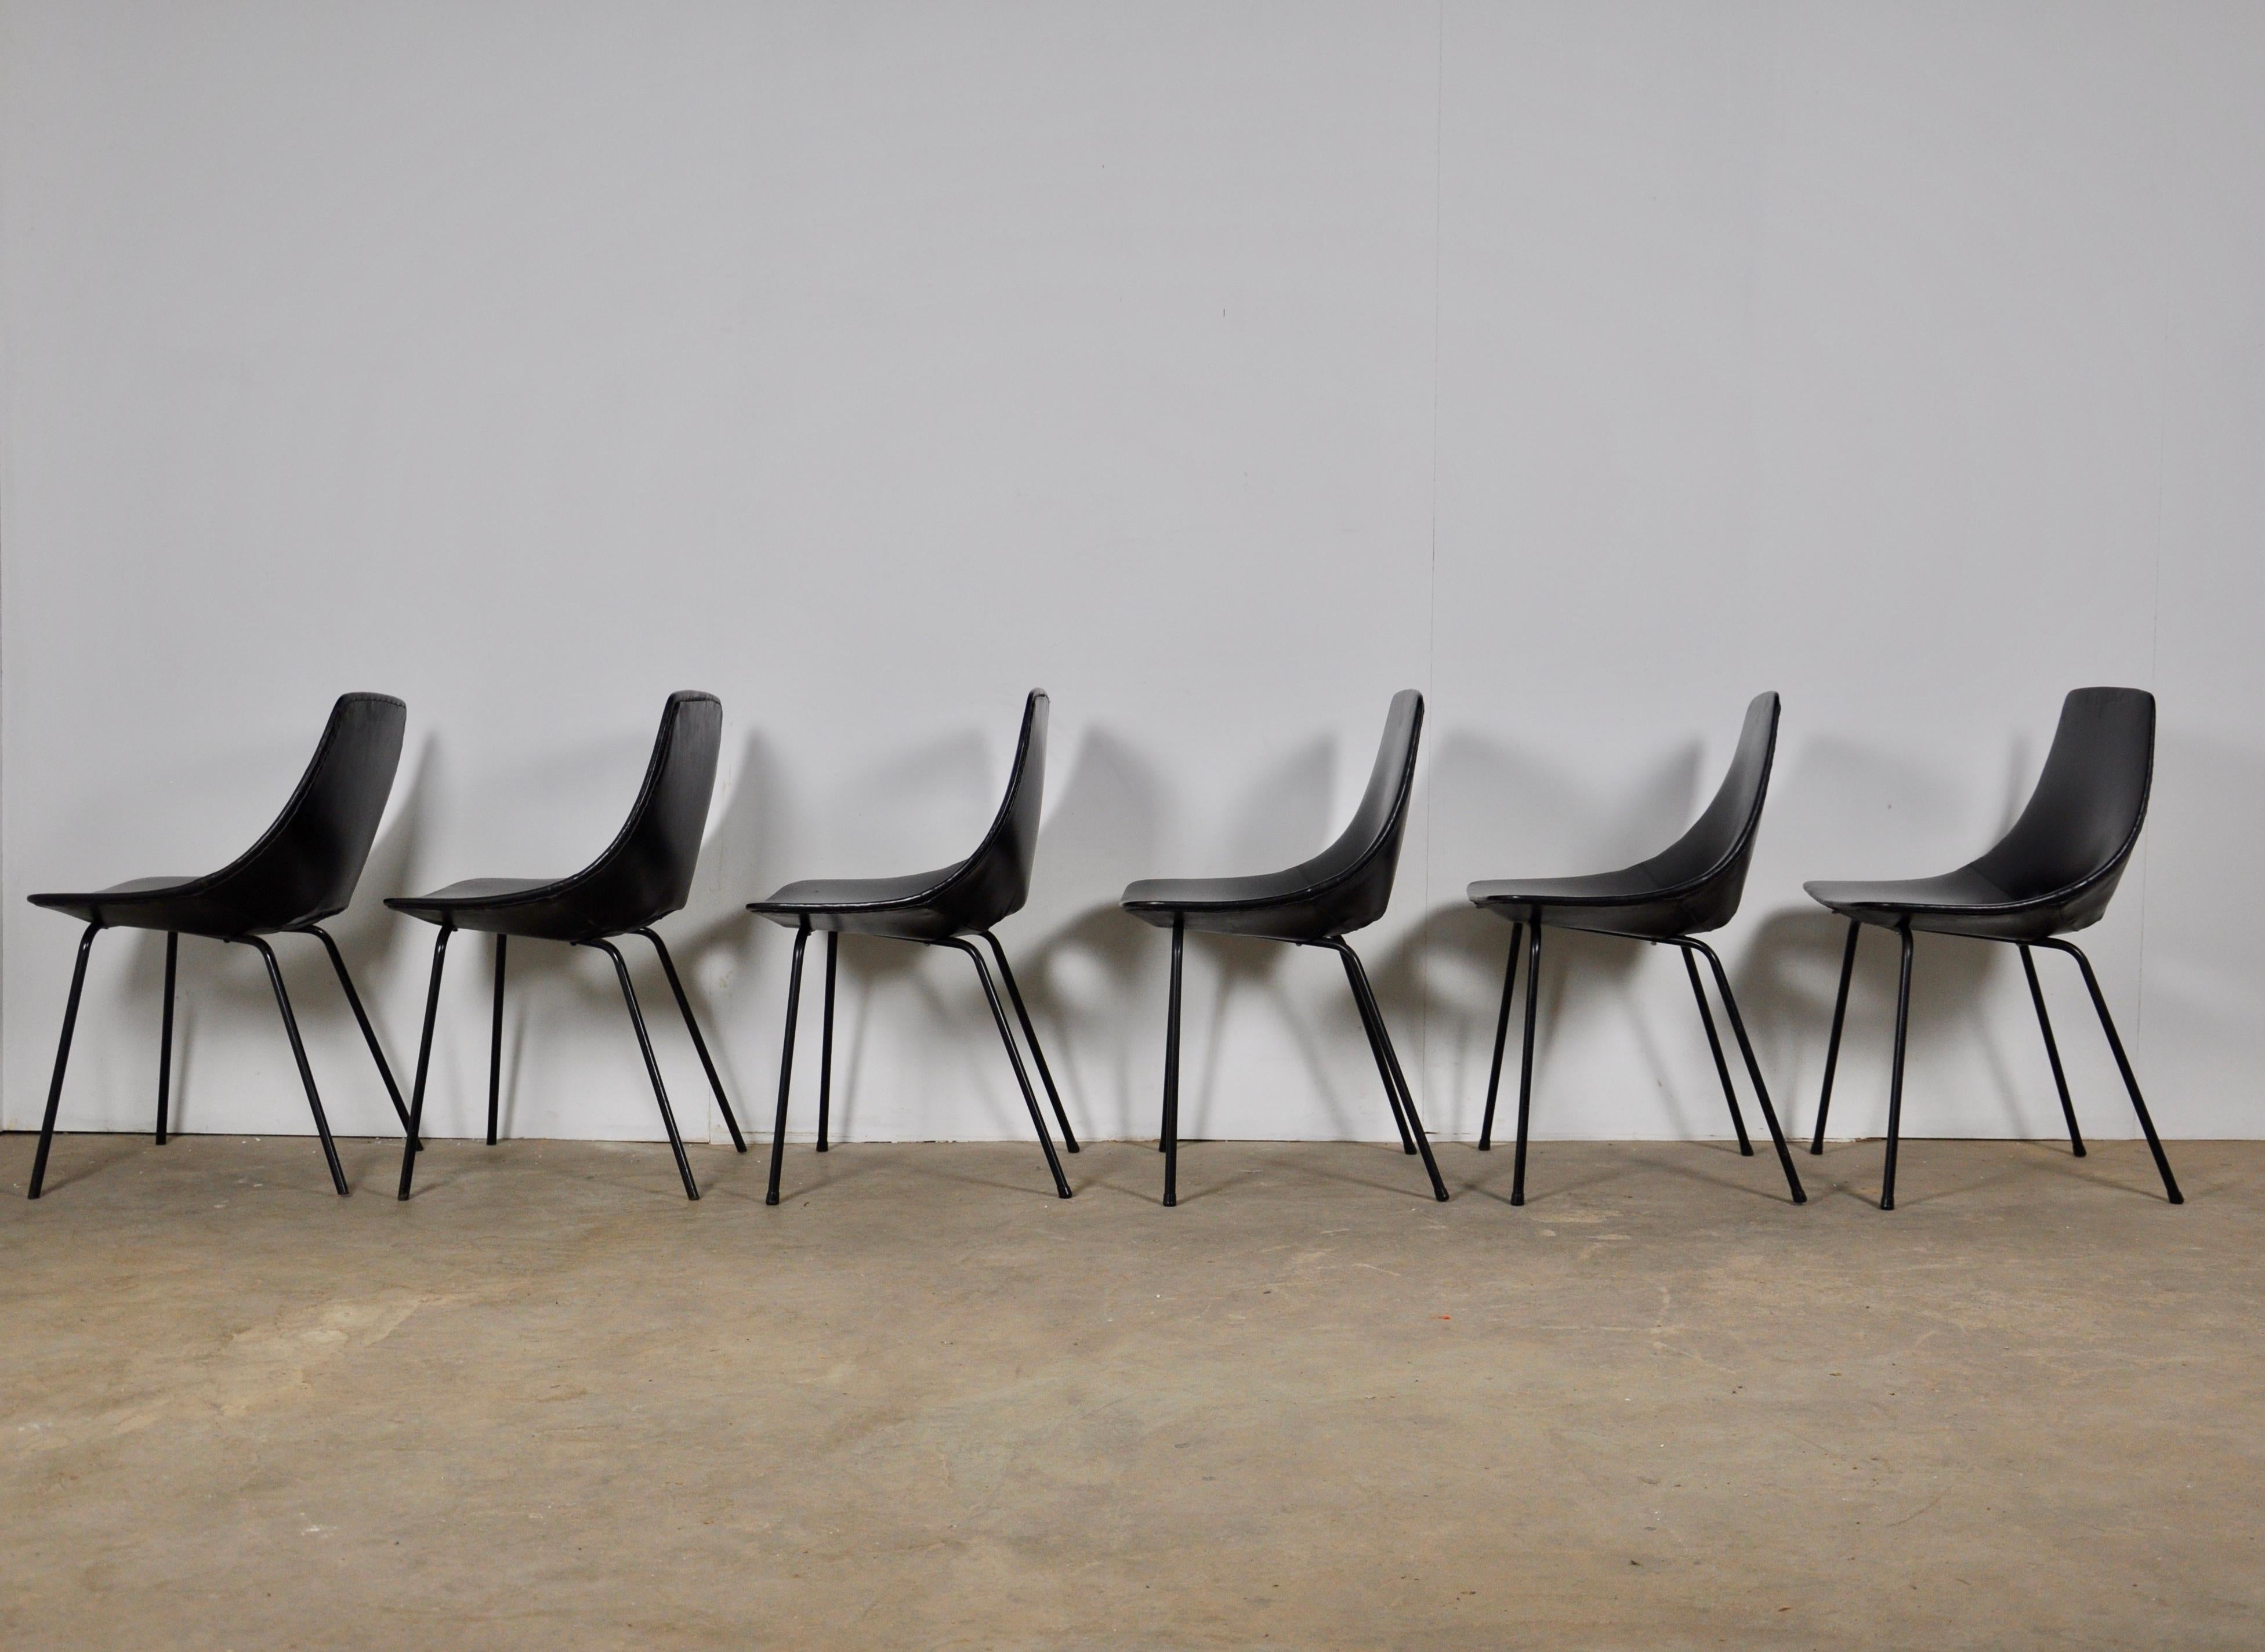 Mid-20th Century Tonneau Chairs by Pierre Guariche for Steiner, 1950s Set of 6